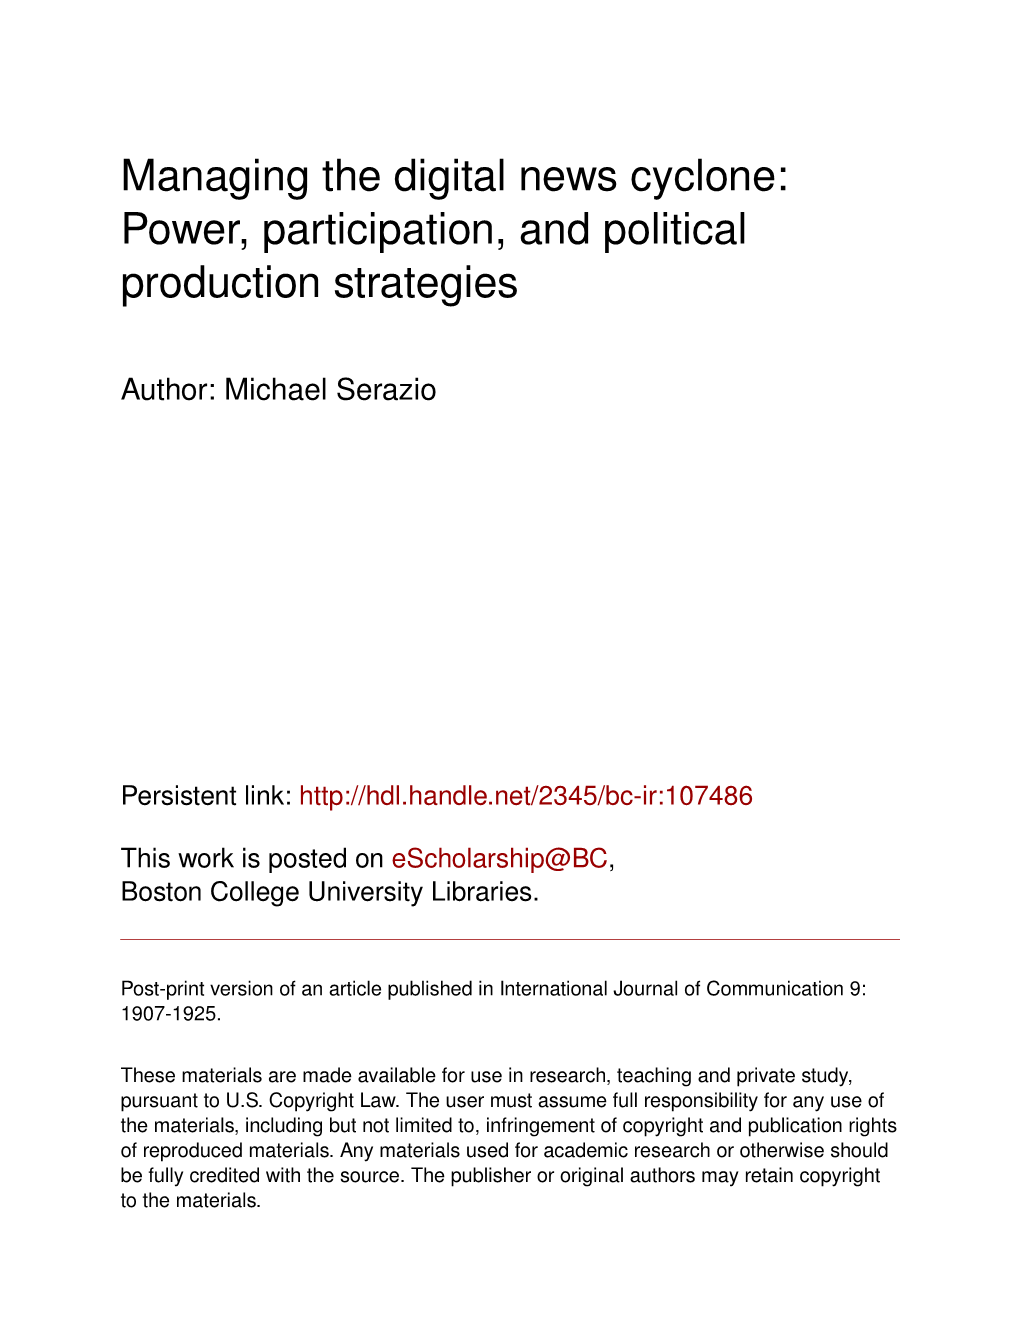 Managing the Digital News Cyclone: Power, Participation, and Political Production Strategies